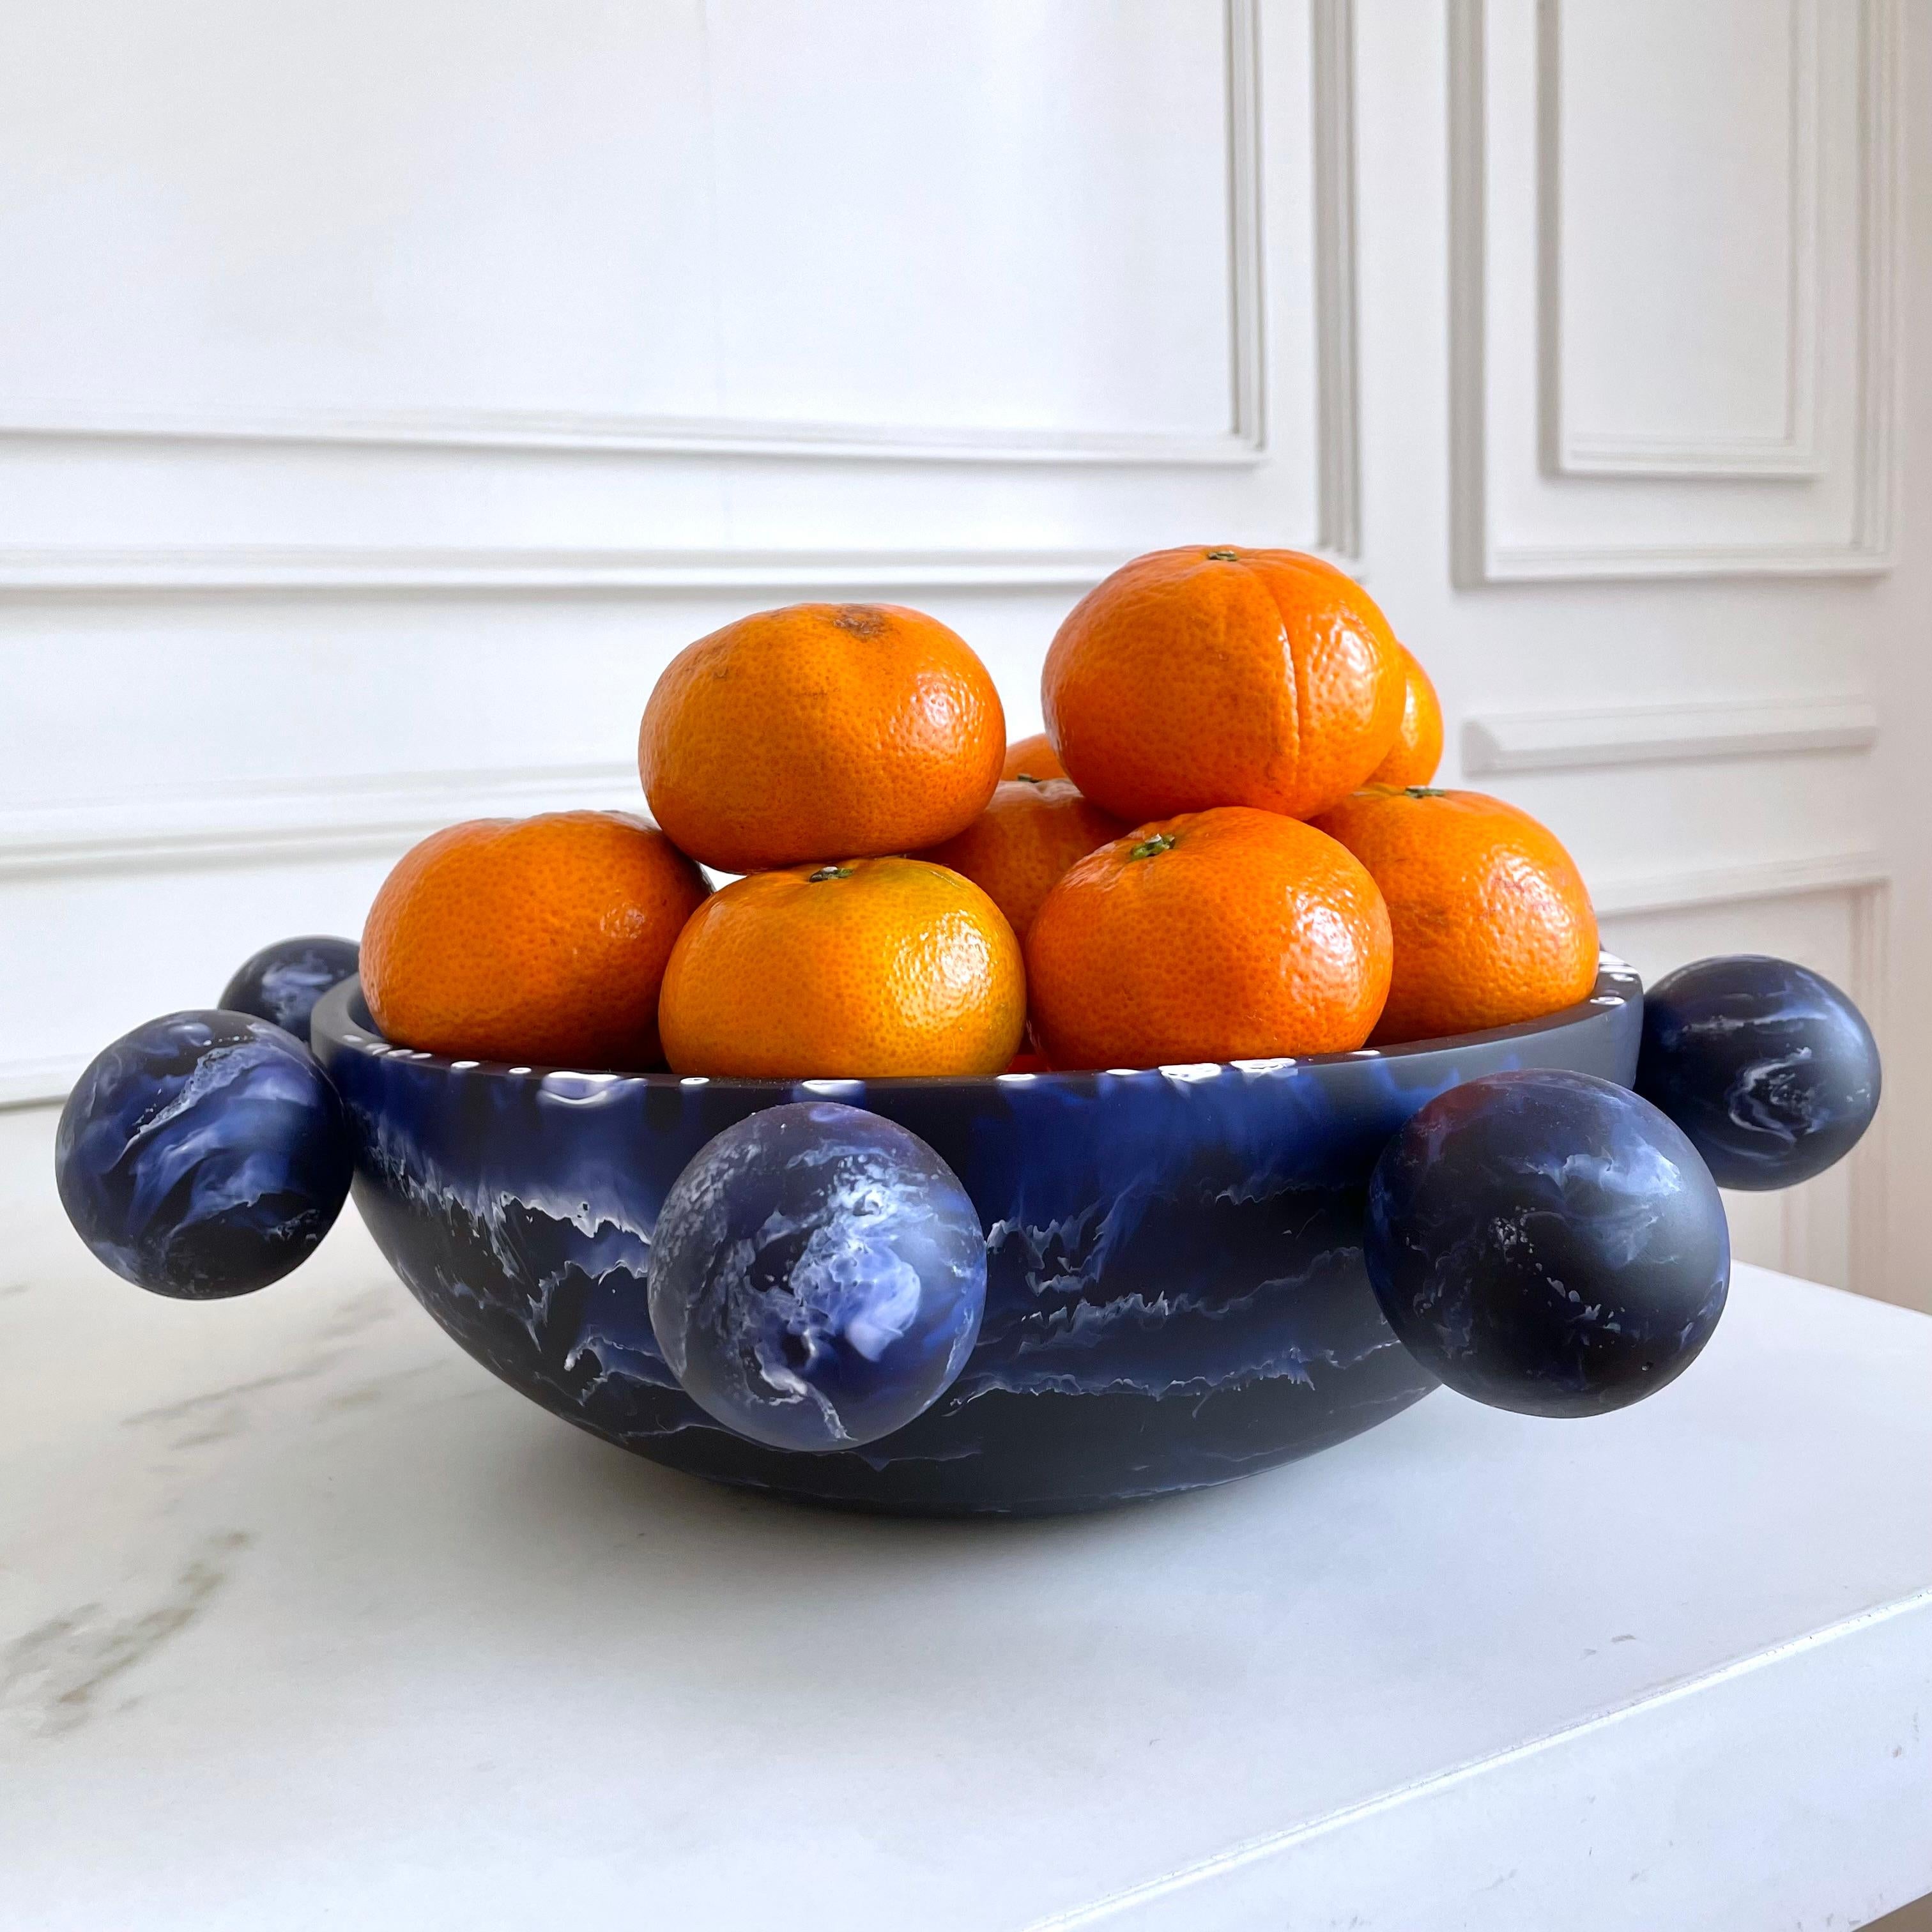 Our Bubble Bowl is handmade in navy blue & white marbled resin. Its modern, fun and unique design makes it a statement piece and can be used as decor or as a fruit platter.

Designed by Paola Valle and manufactured in Mexico City by extraordinary